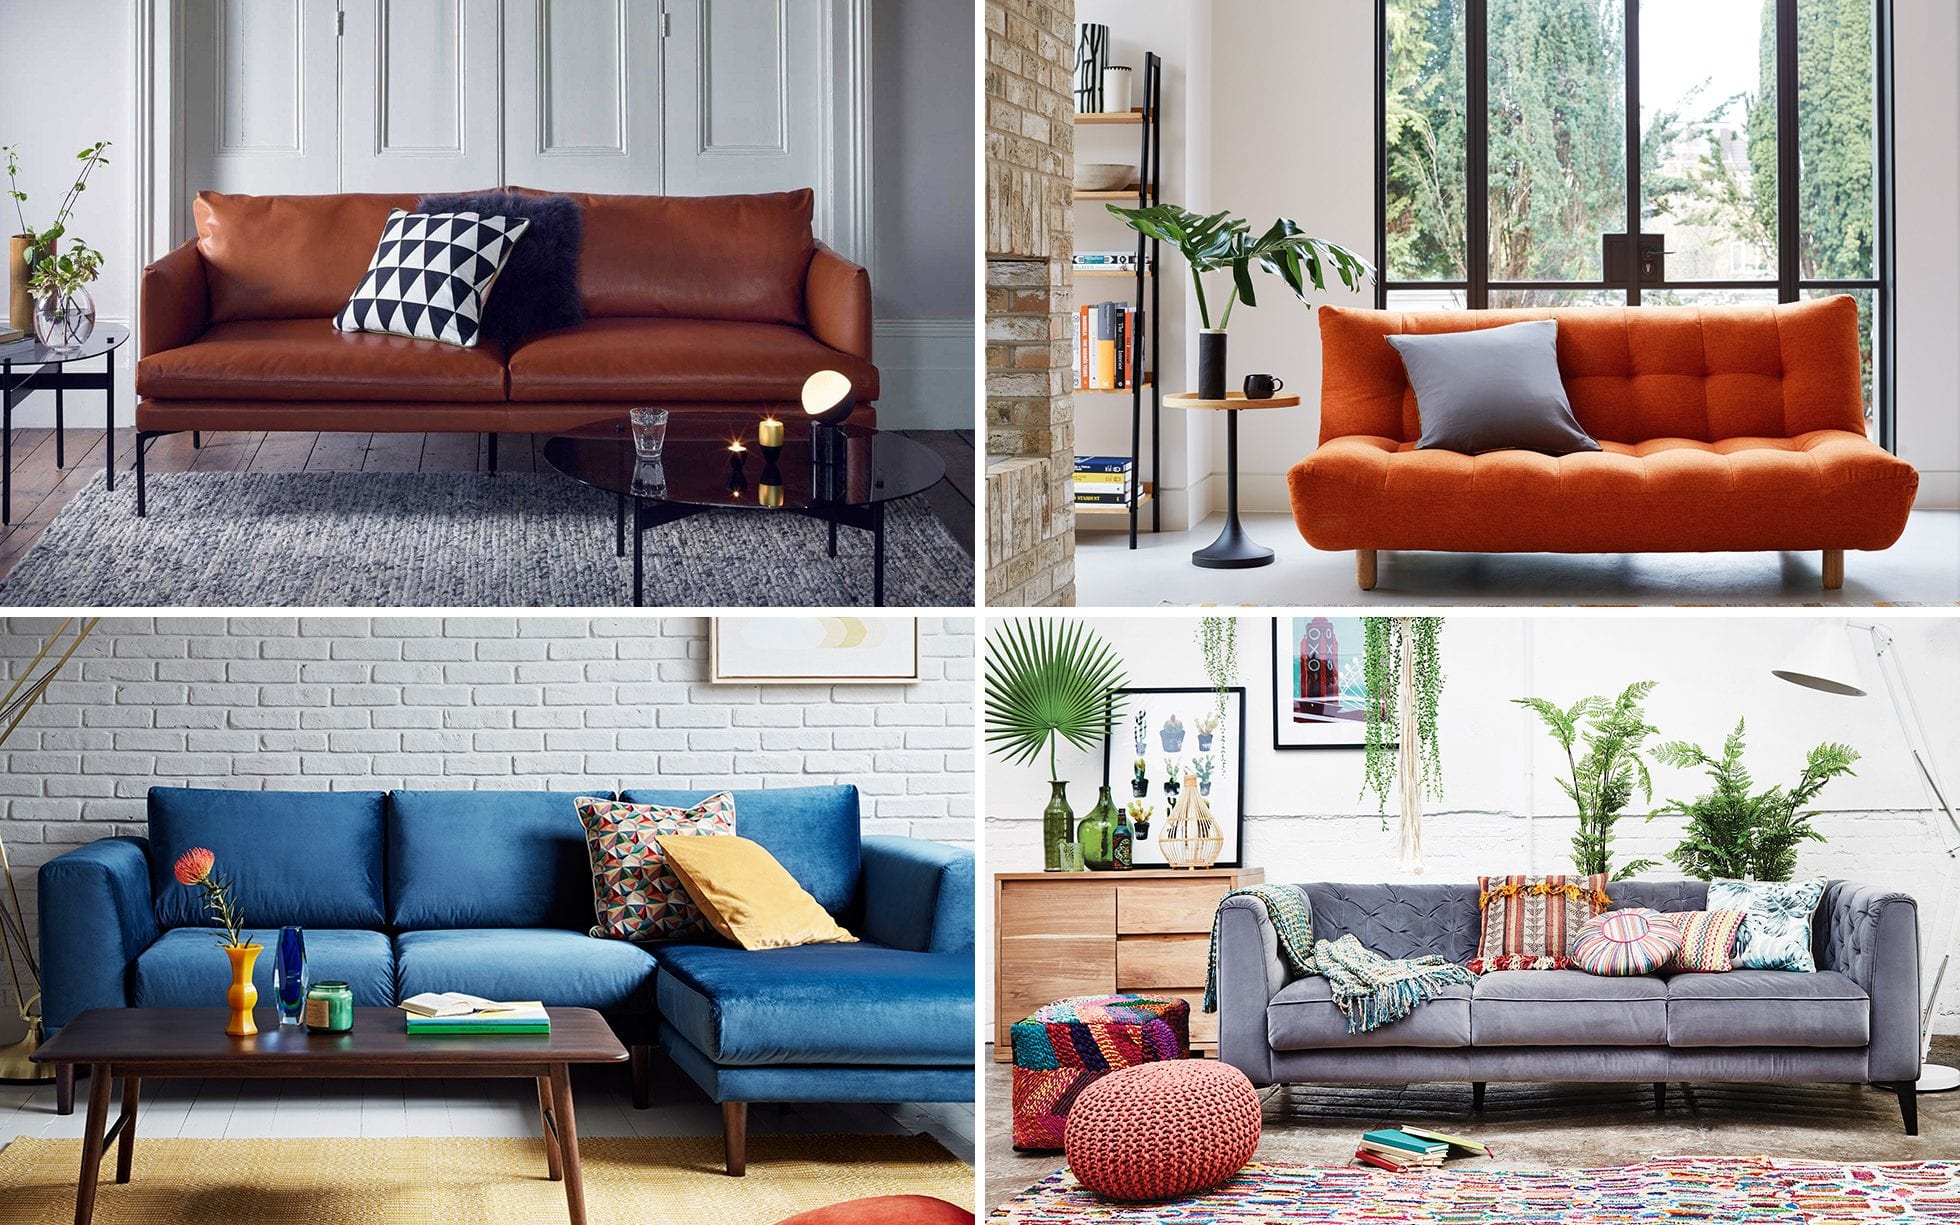 17 of the best sofas and couches to buy for all budgets